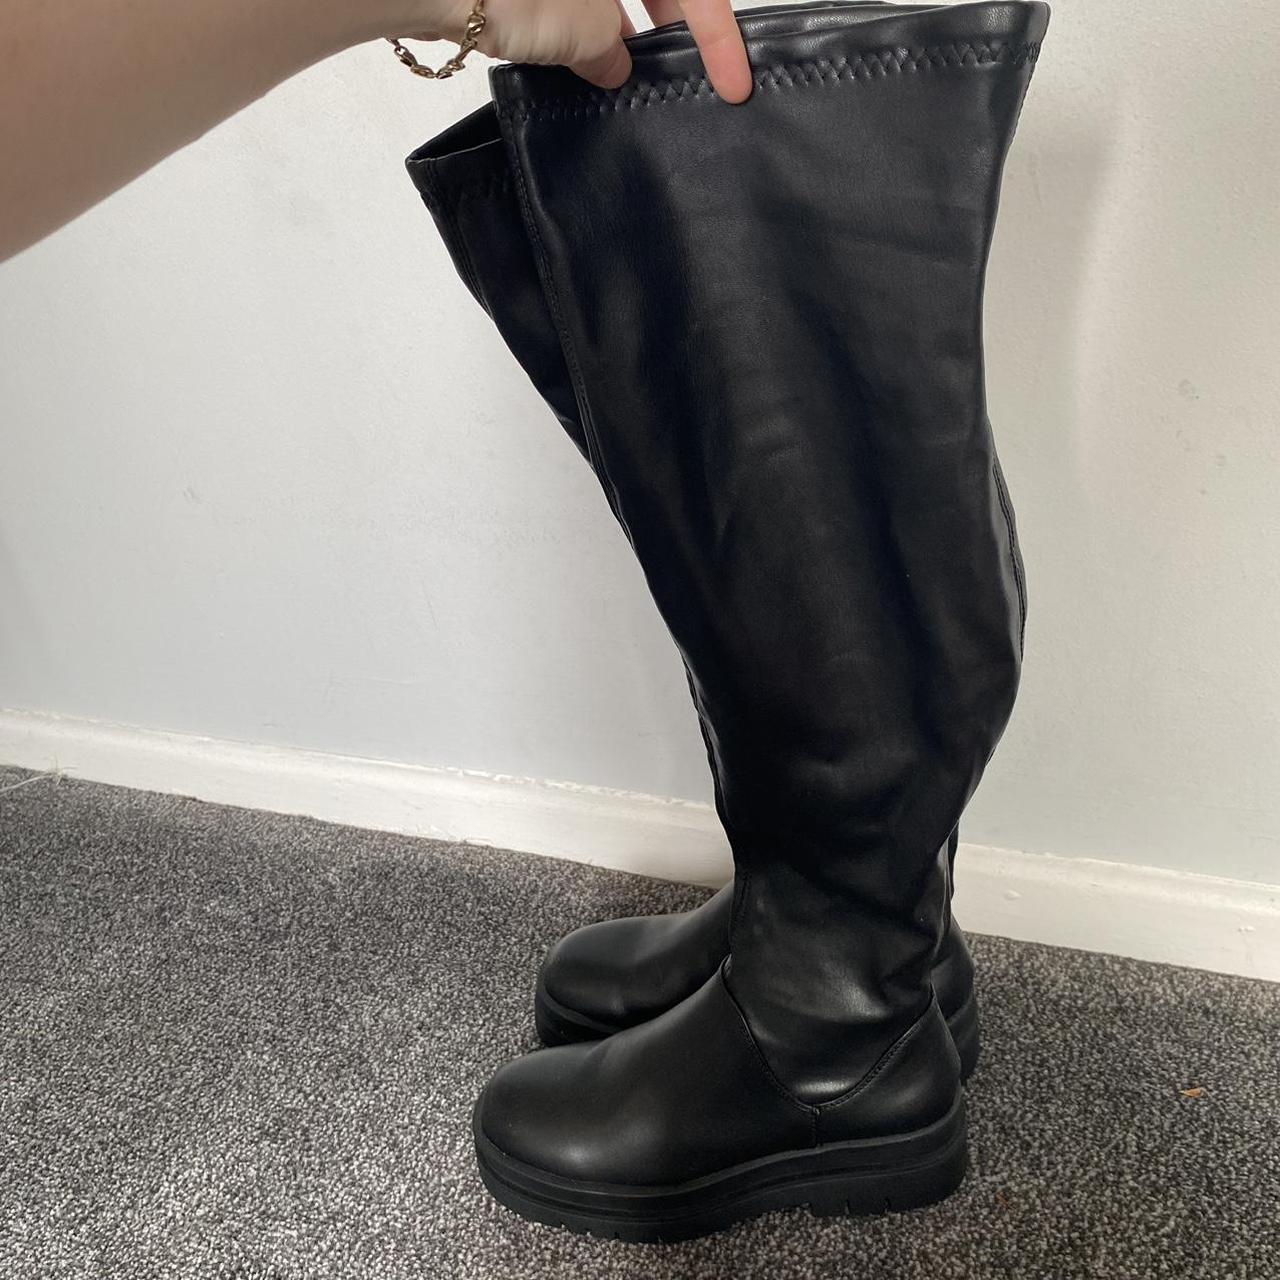 PRIMARK - Over the knee black flat boots LOVE THESE,... - Depop